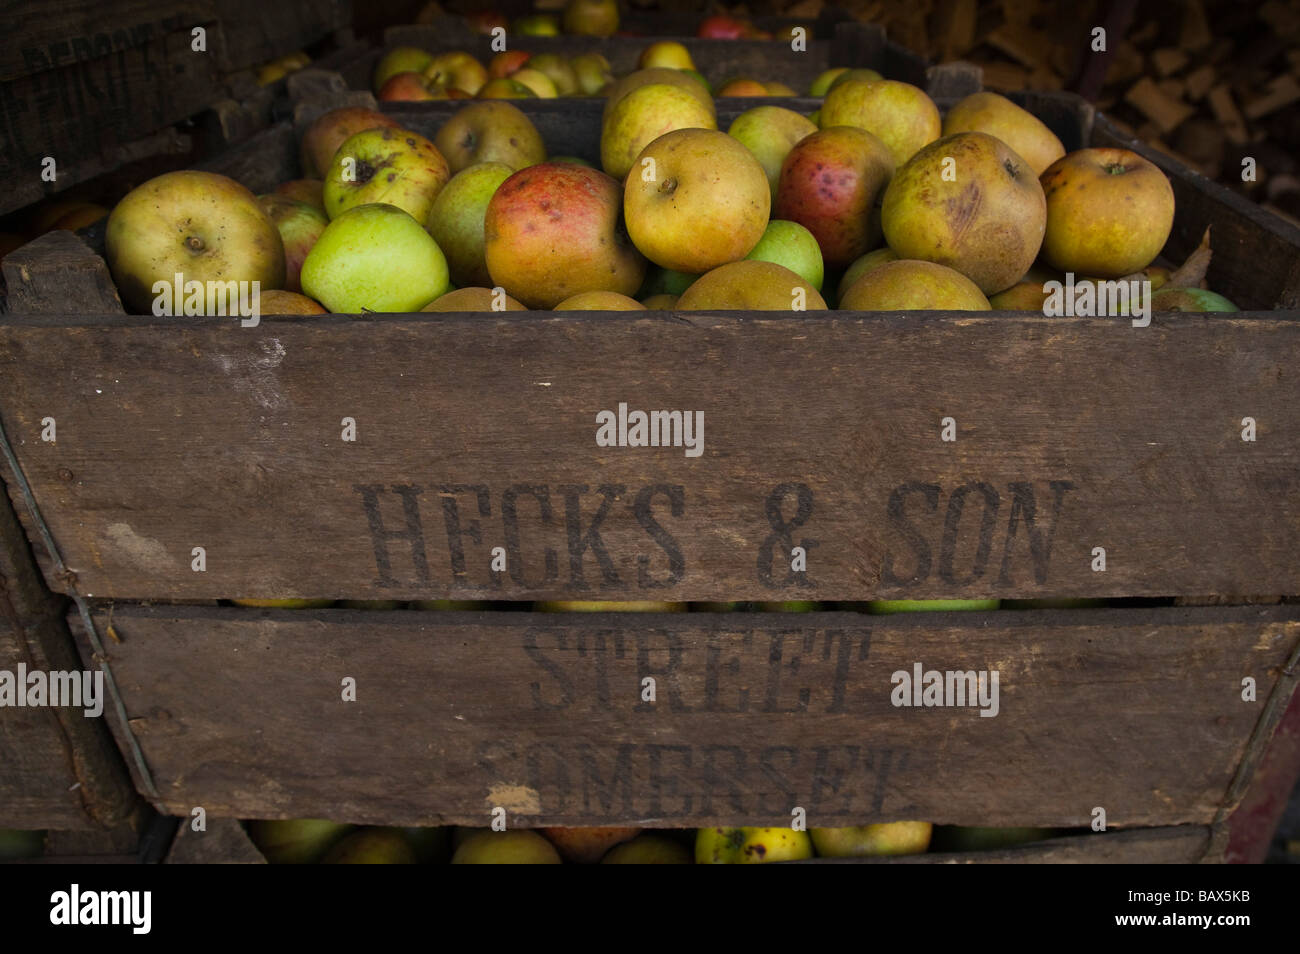 Cider apples in wooden crates ready for crushing Hecks Cider Street Somerset England Stock Photo